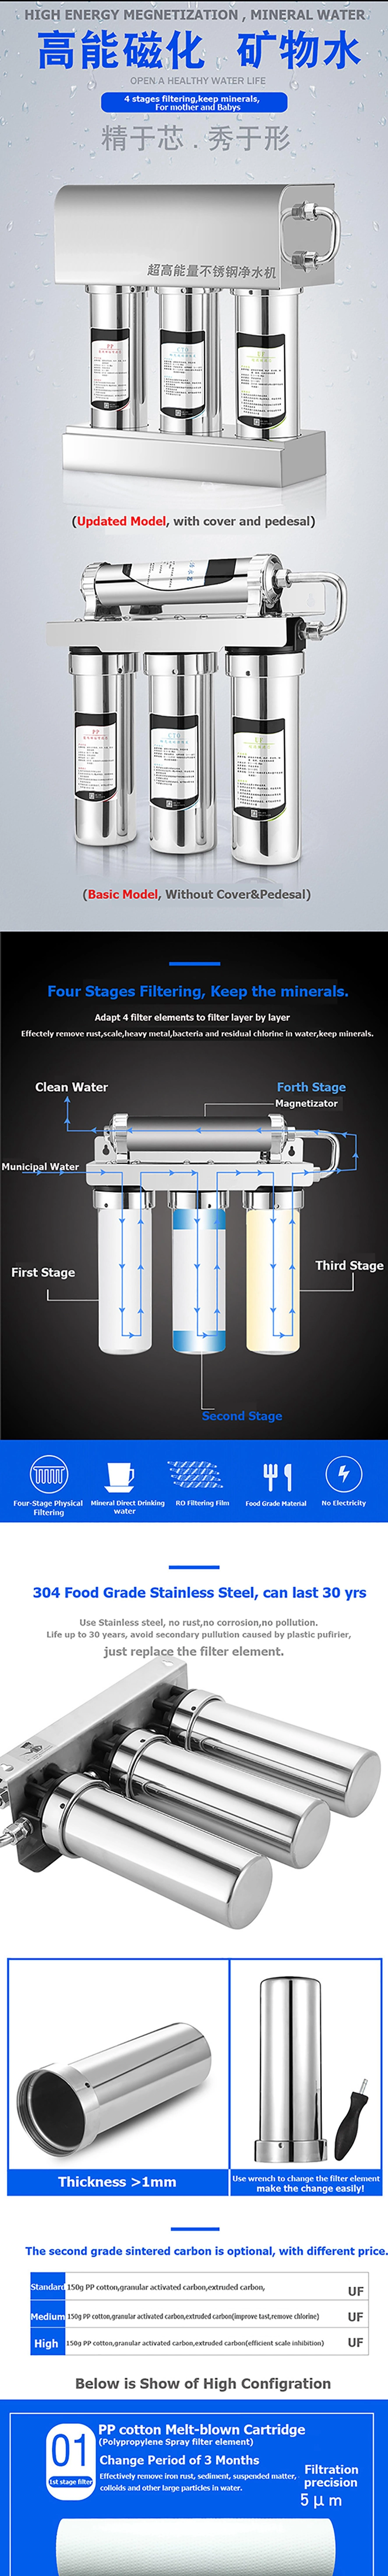 Drinking Water Filtration Machine Table Water Filter Purifier Home